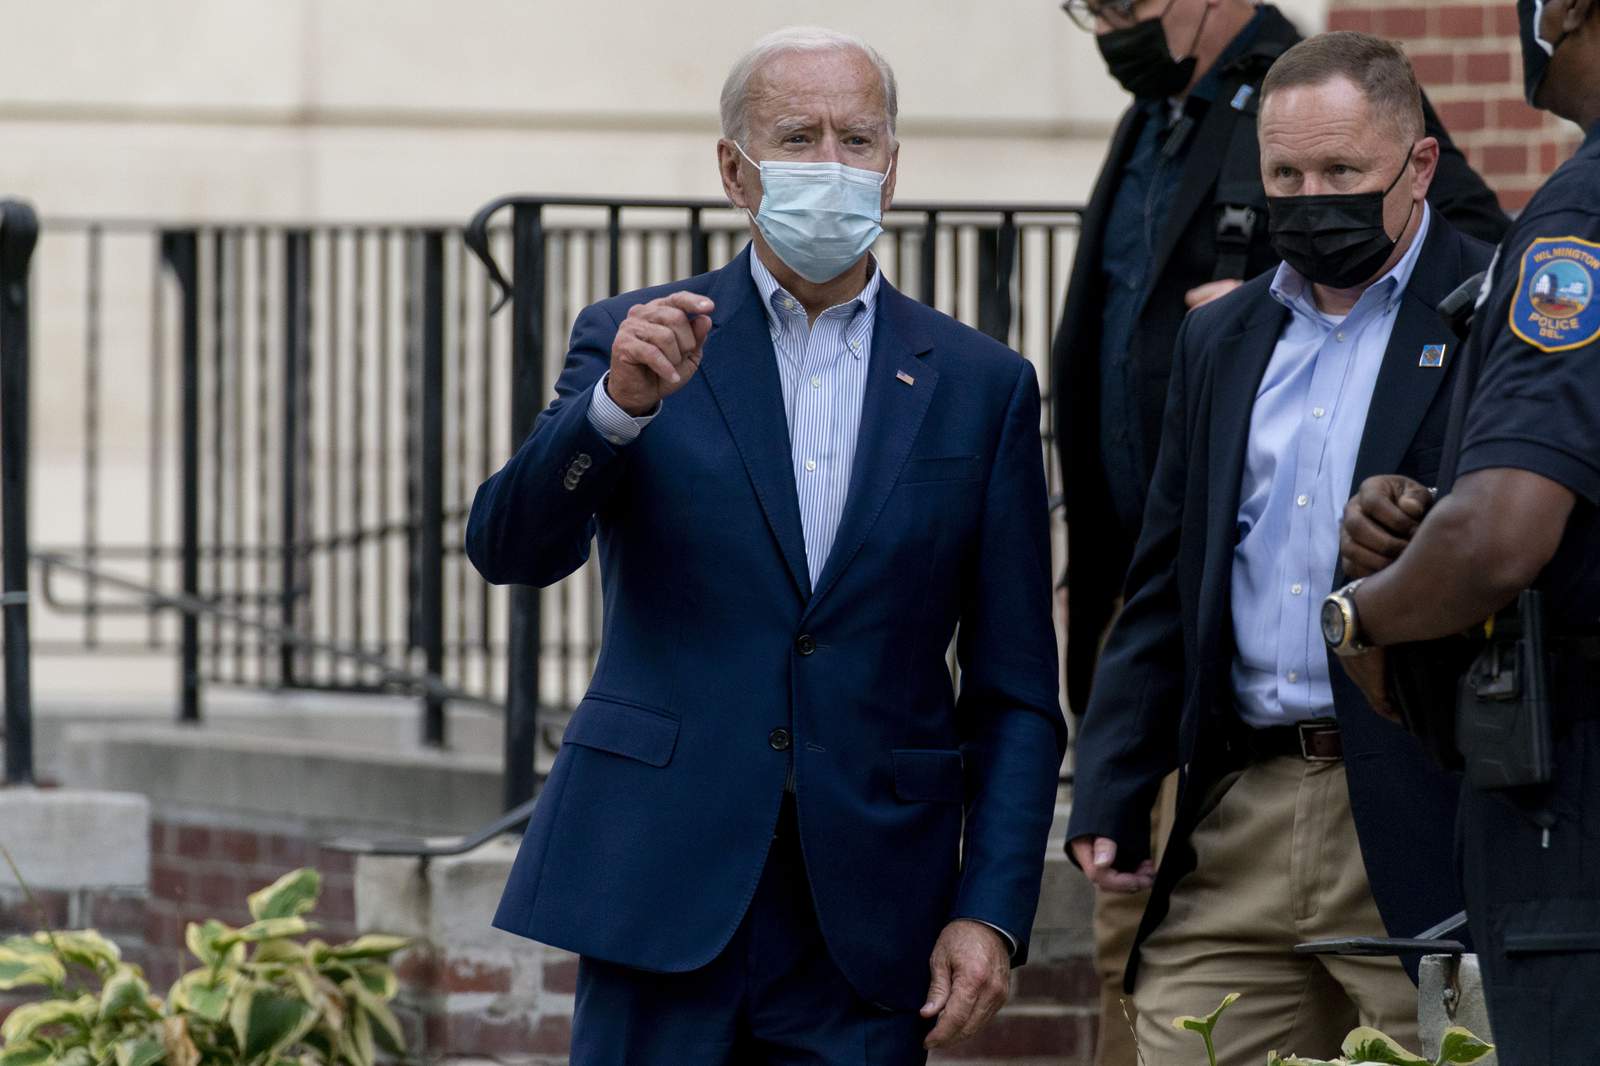 The Latest: Campaign says Biden tests negative for virus